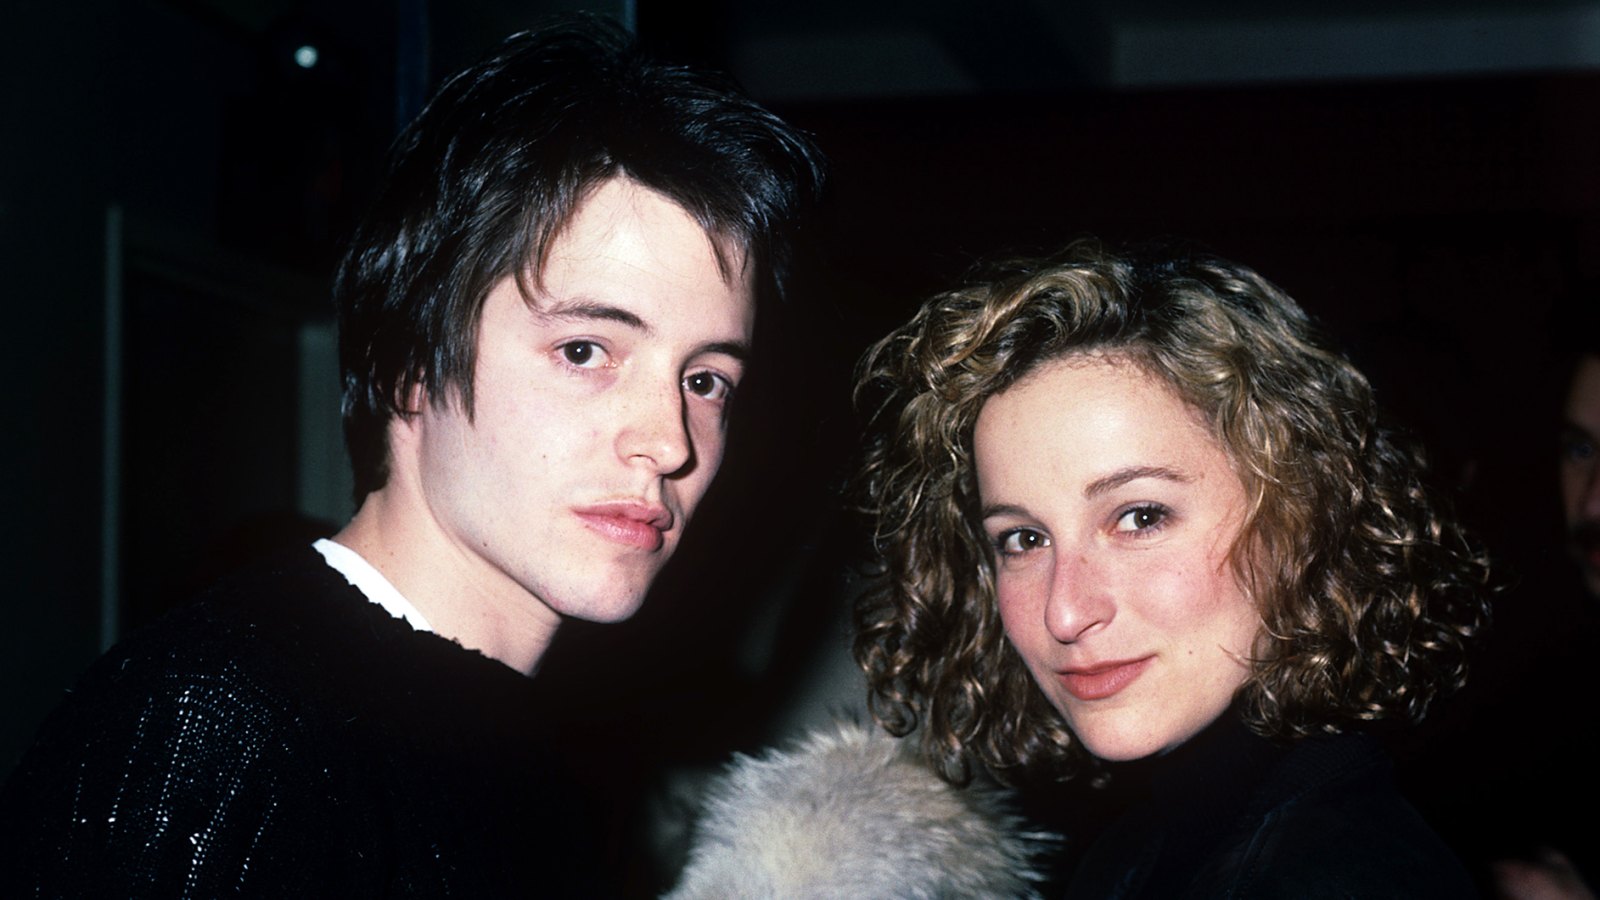 Jennifer Grey Recalls Traumatic Car Accident With Matthew Broderick That Left 2 People Dead: ‘You Don’t Come Back From That’